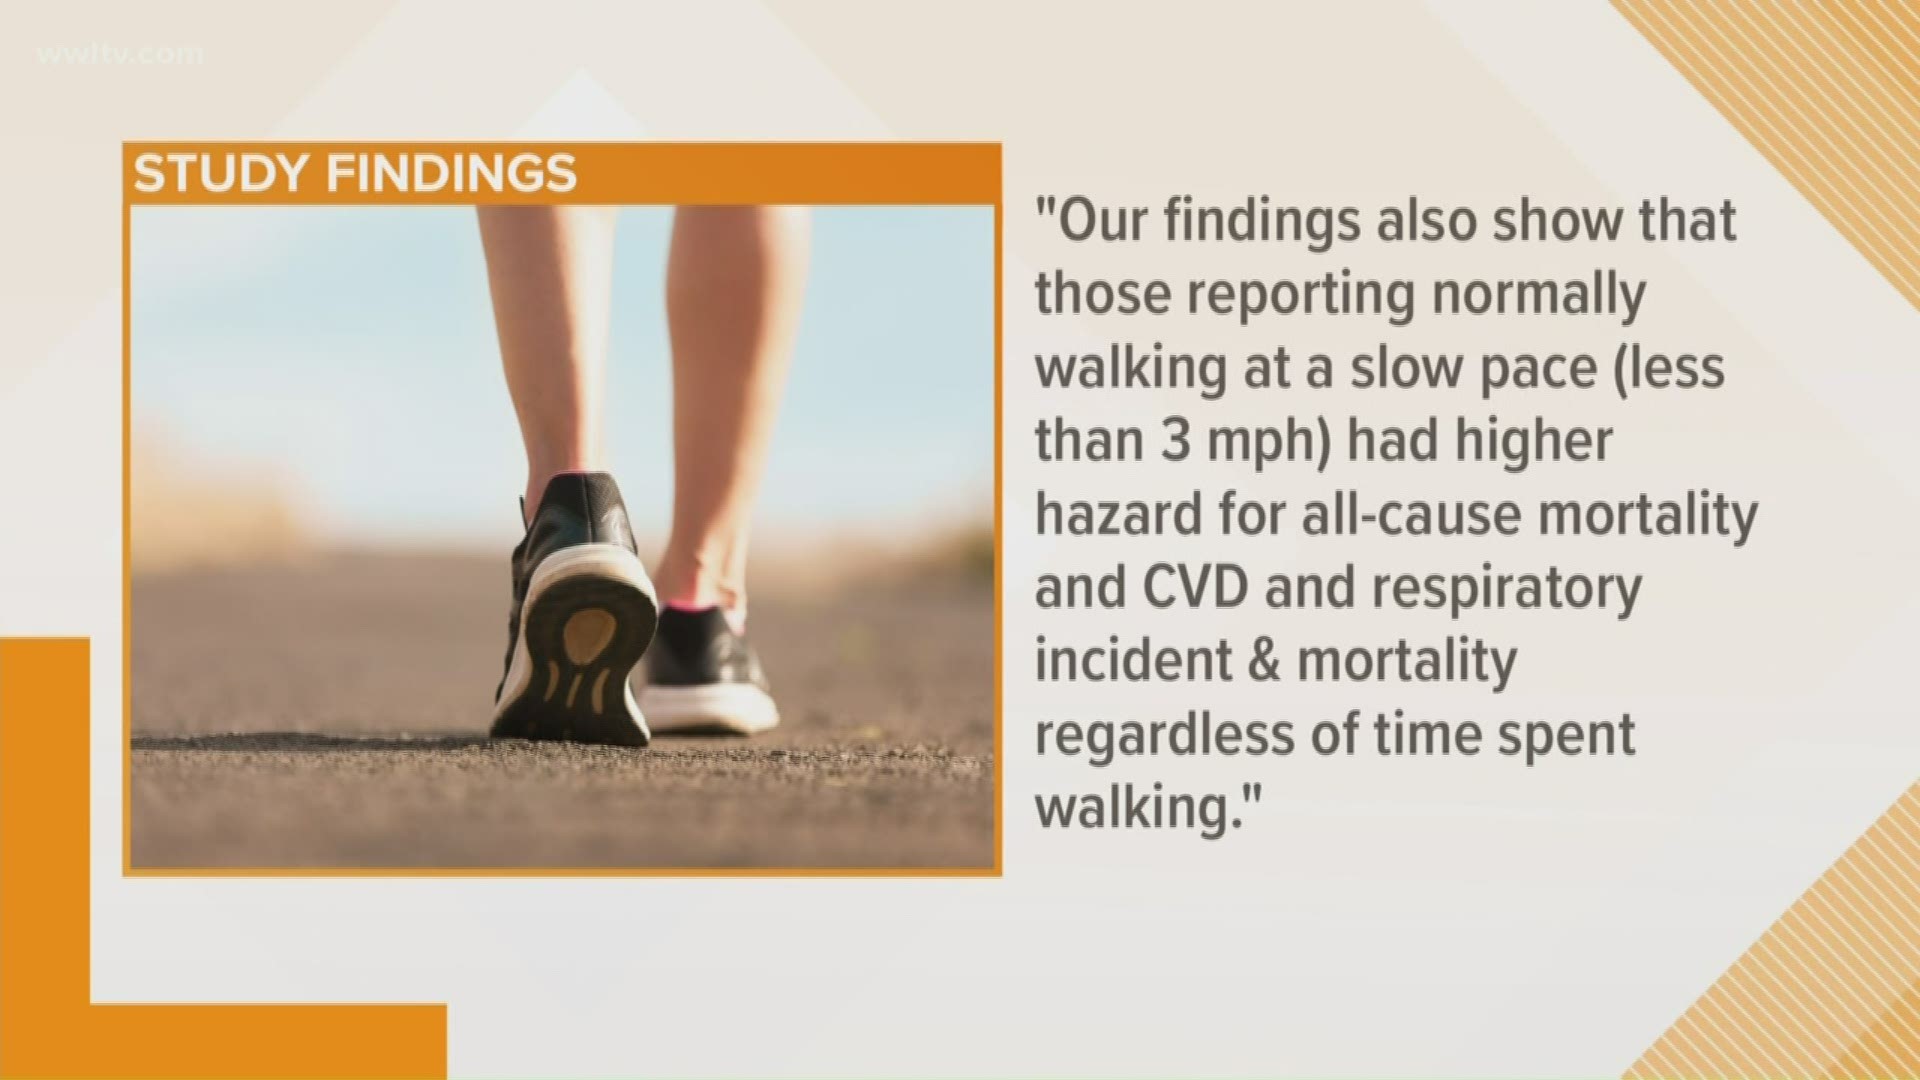 Mackie and April talks about how walking can help reduce mortality risk.